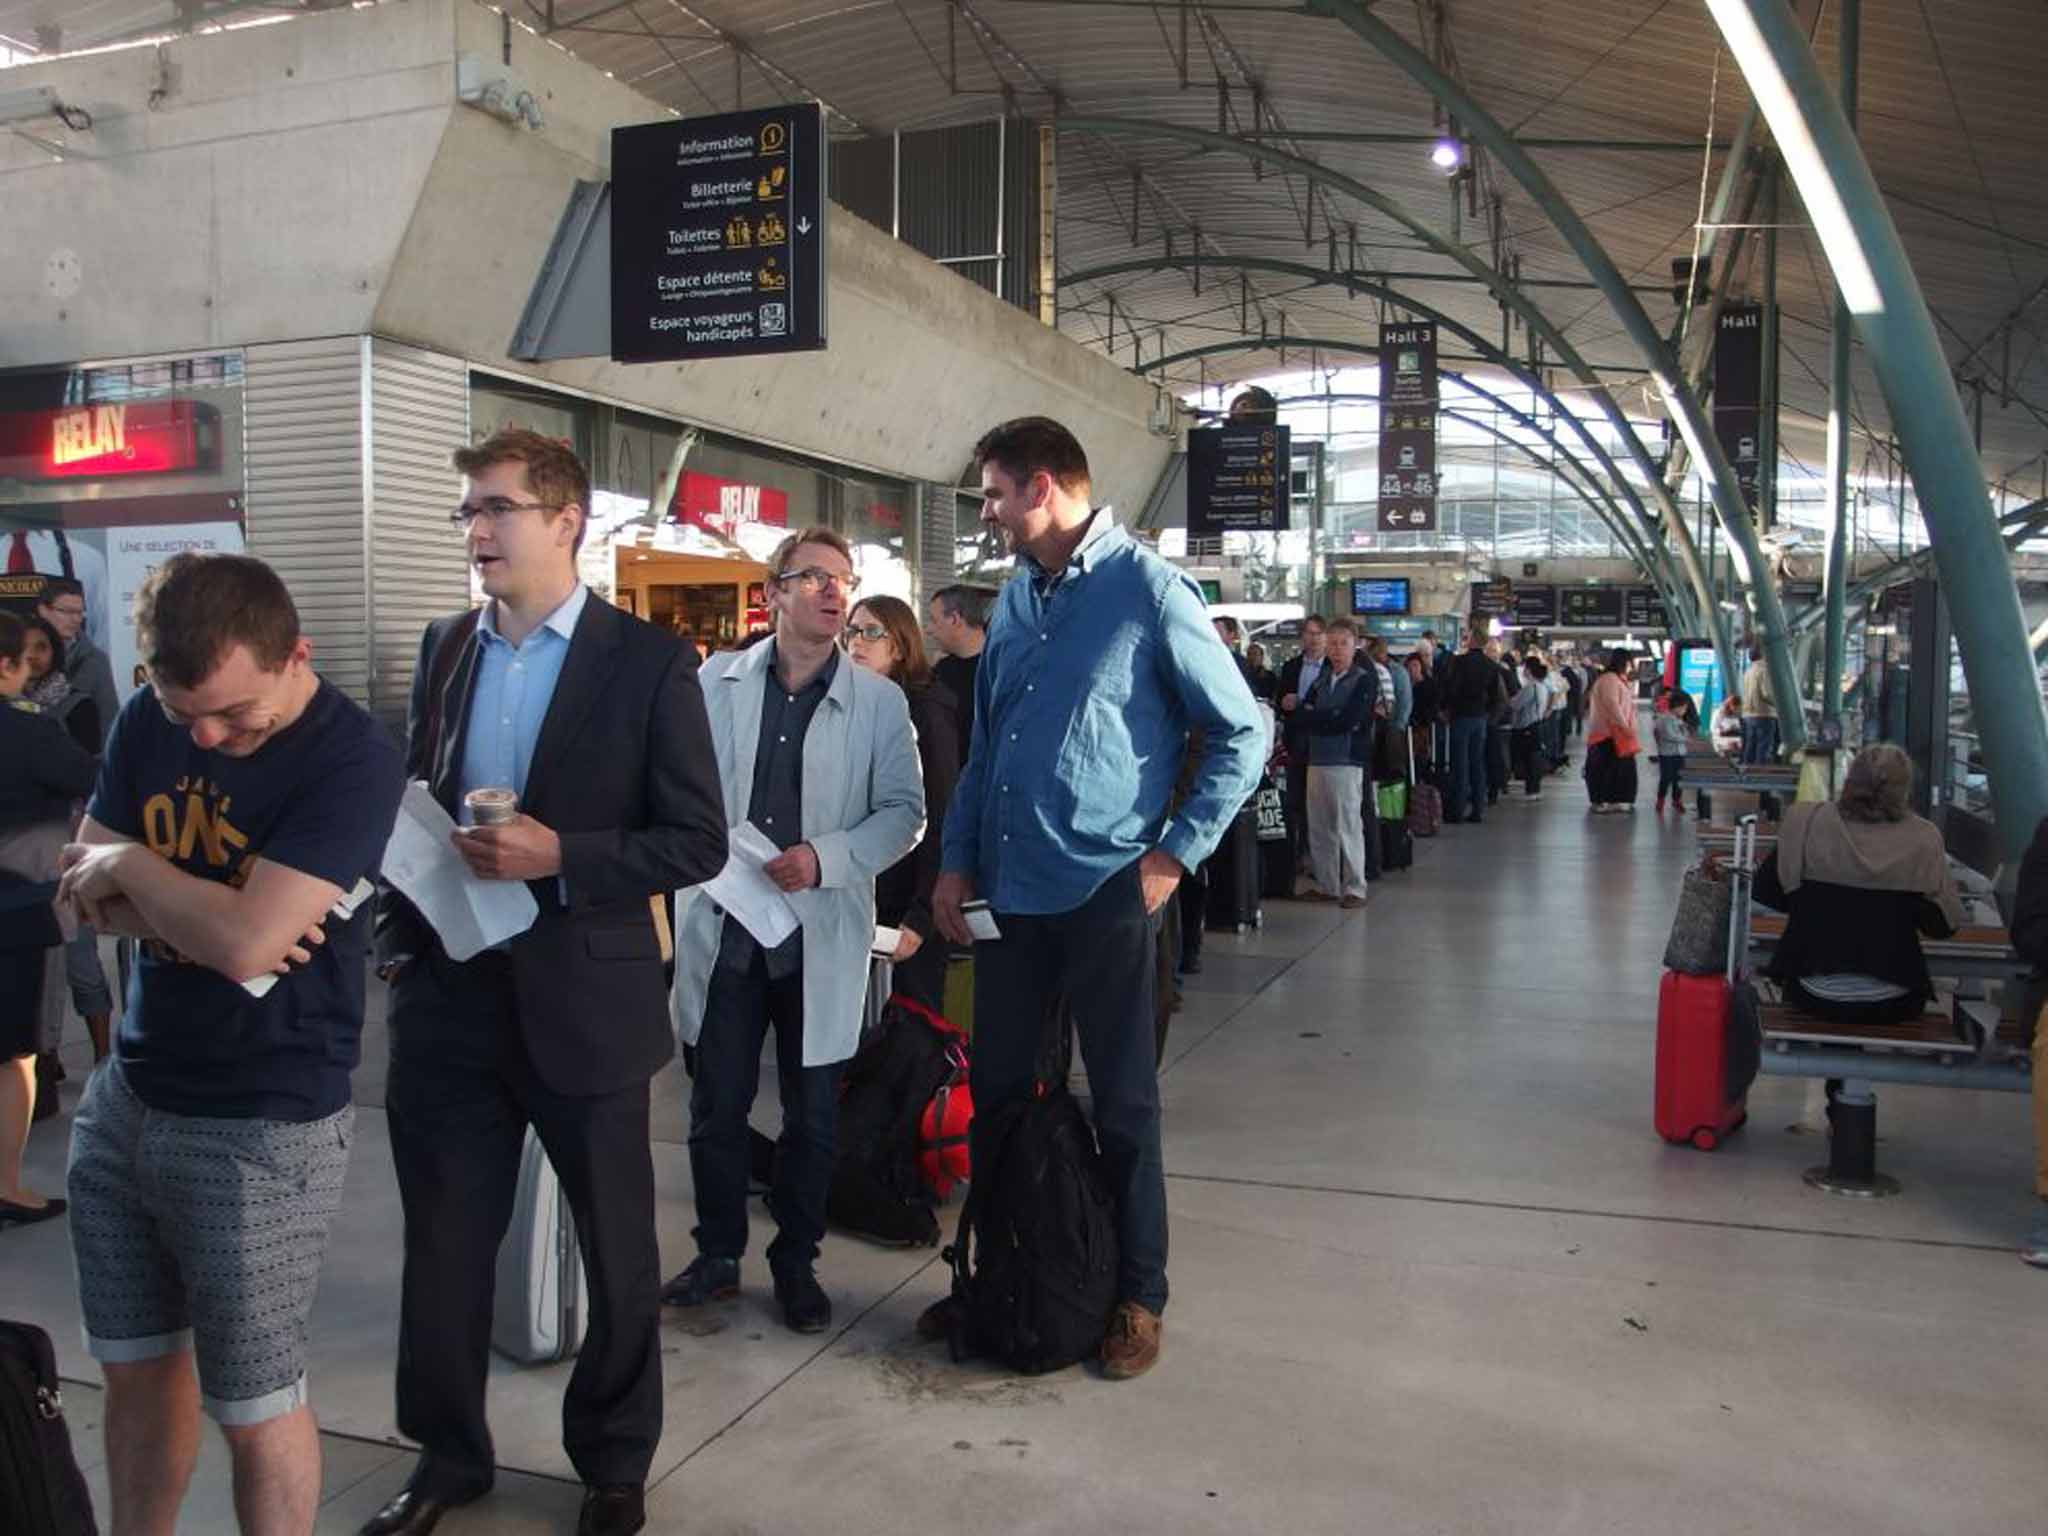 Lost in France: stranded: passengers wait for information at Lille Europe station